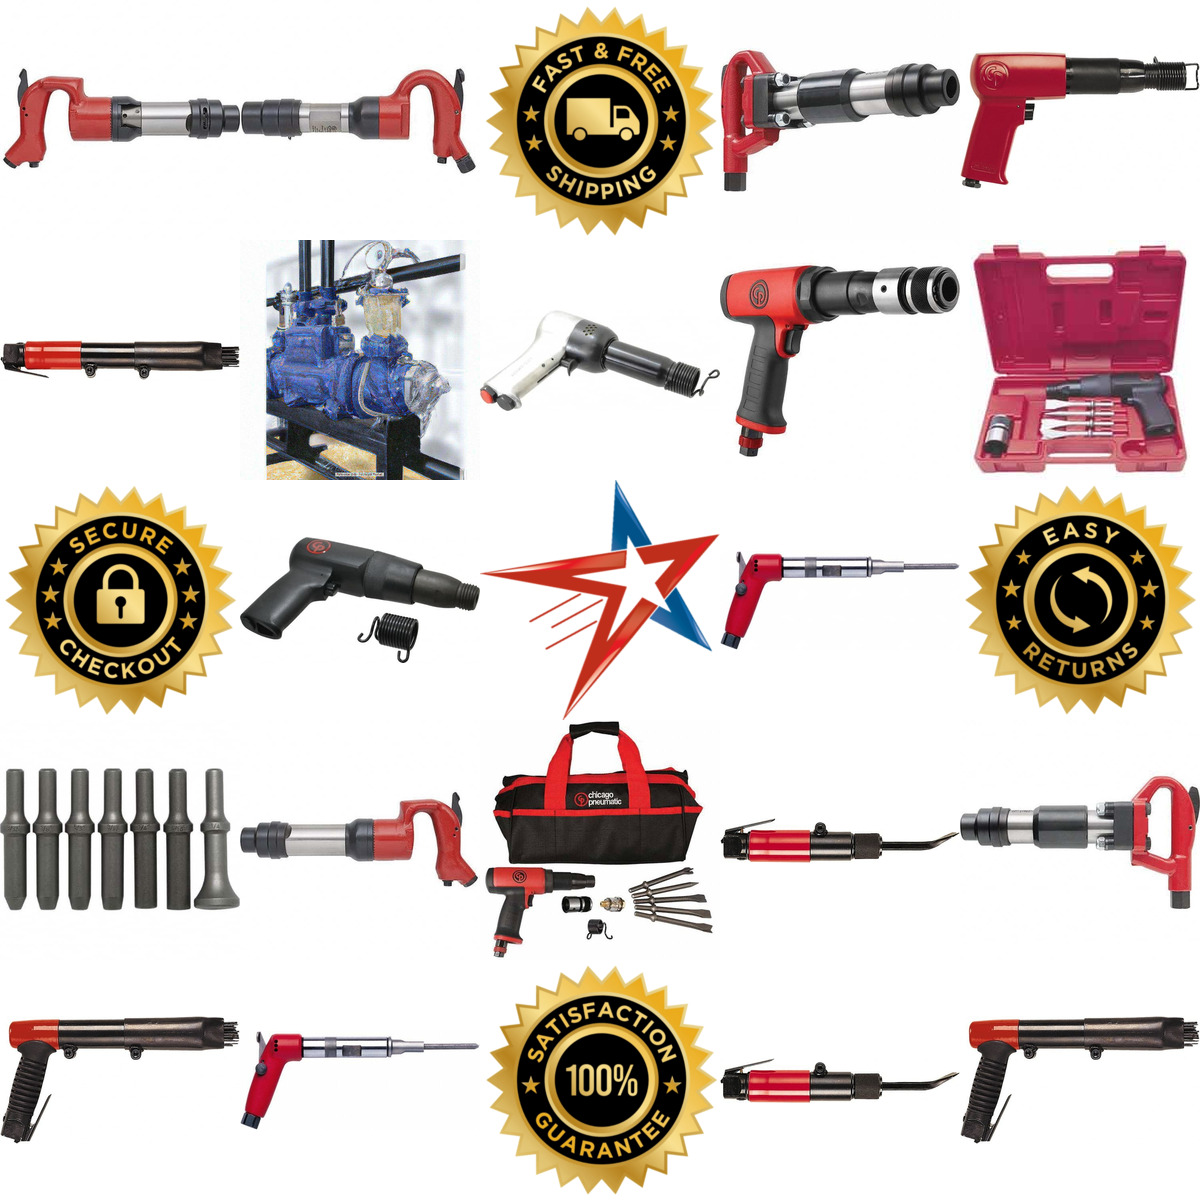 A selection of Chicago Pneumatic products on GoVets